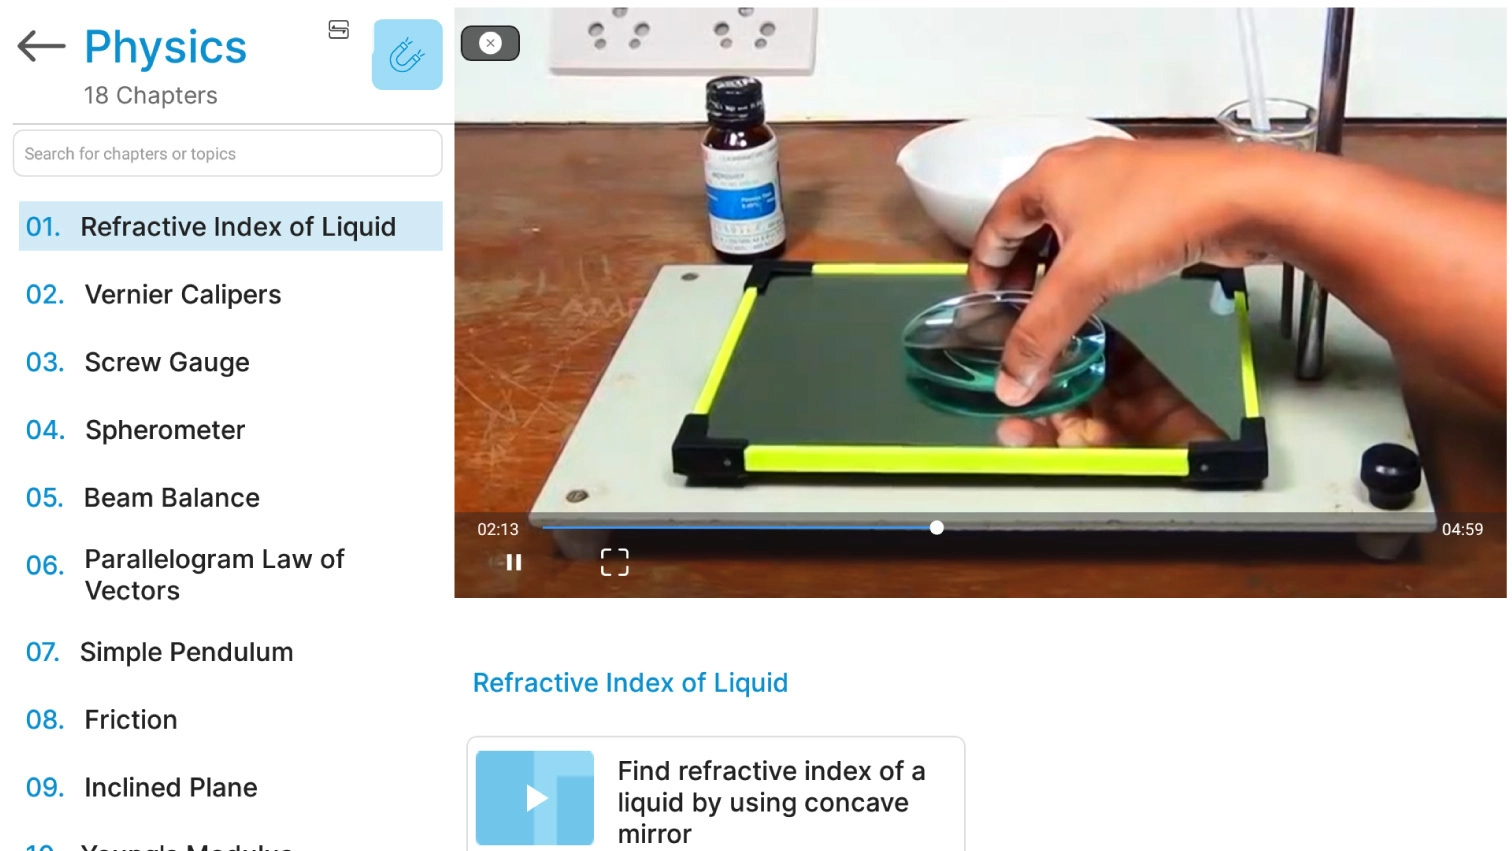 Visuals of Digital Learning Content, Practical Lab Videos For Practical Learning in Maths and Science by iDream Education